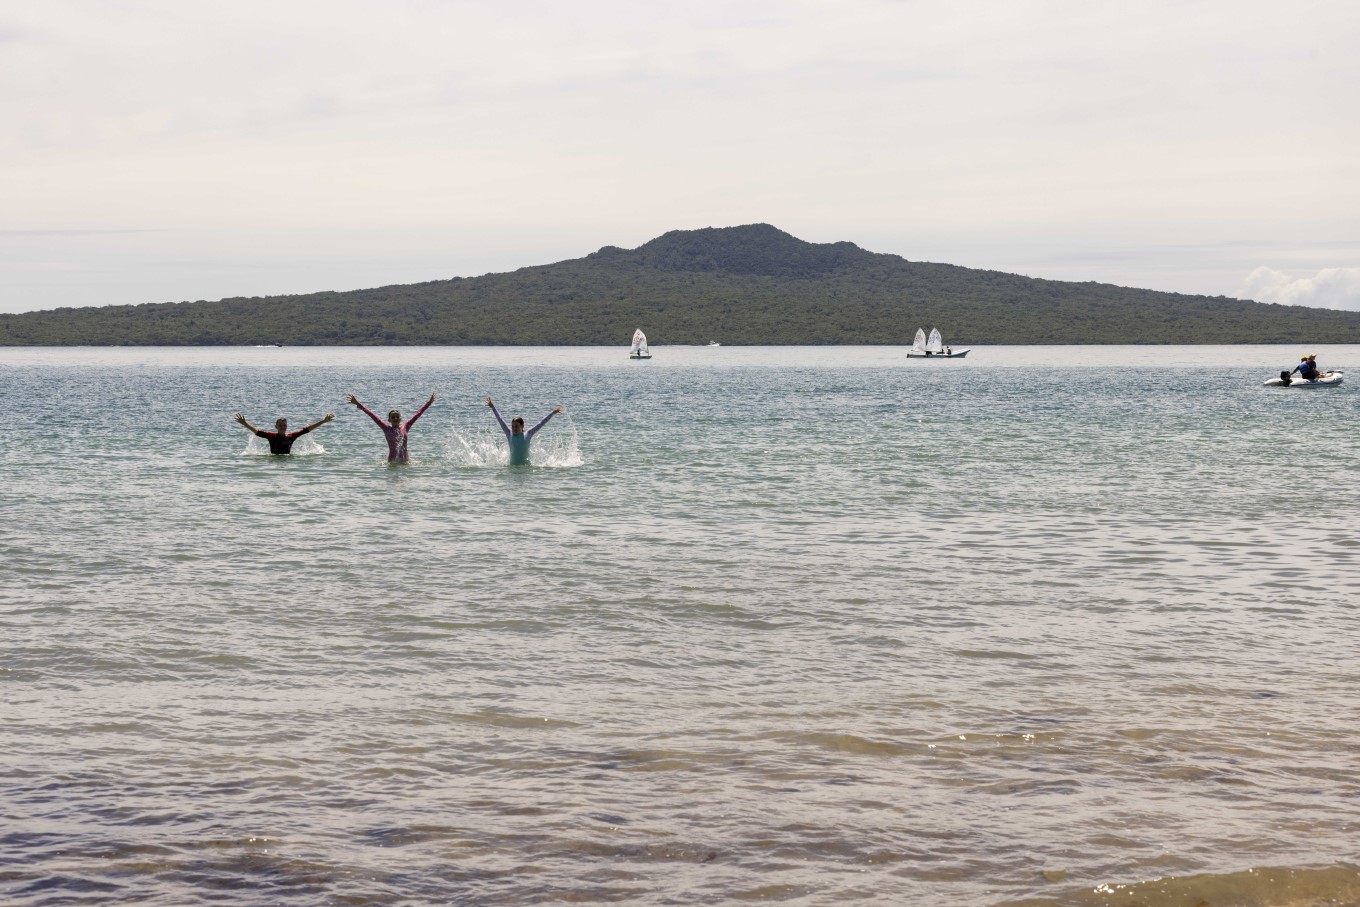 The North Shore is spoilt for choice when it comes to all-round good high-tide beaches. Choose from Takapuna, Thorne Bay, Narrowneck and Cheltenham.